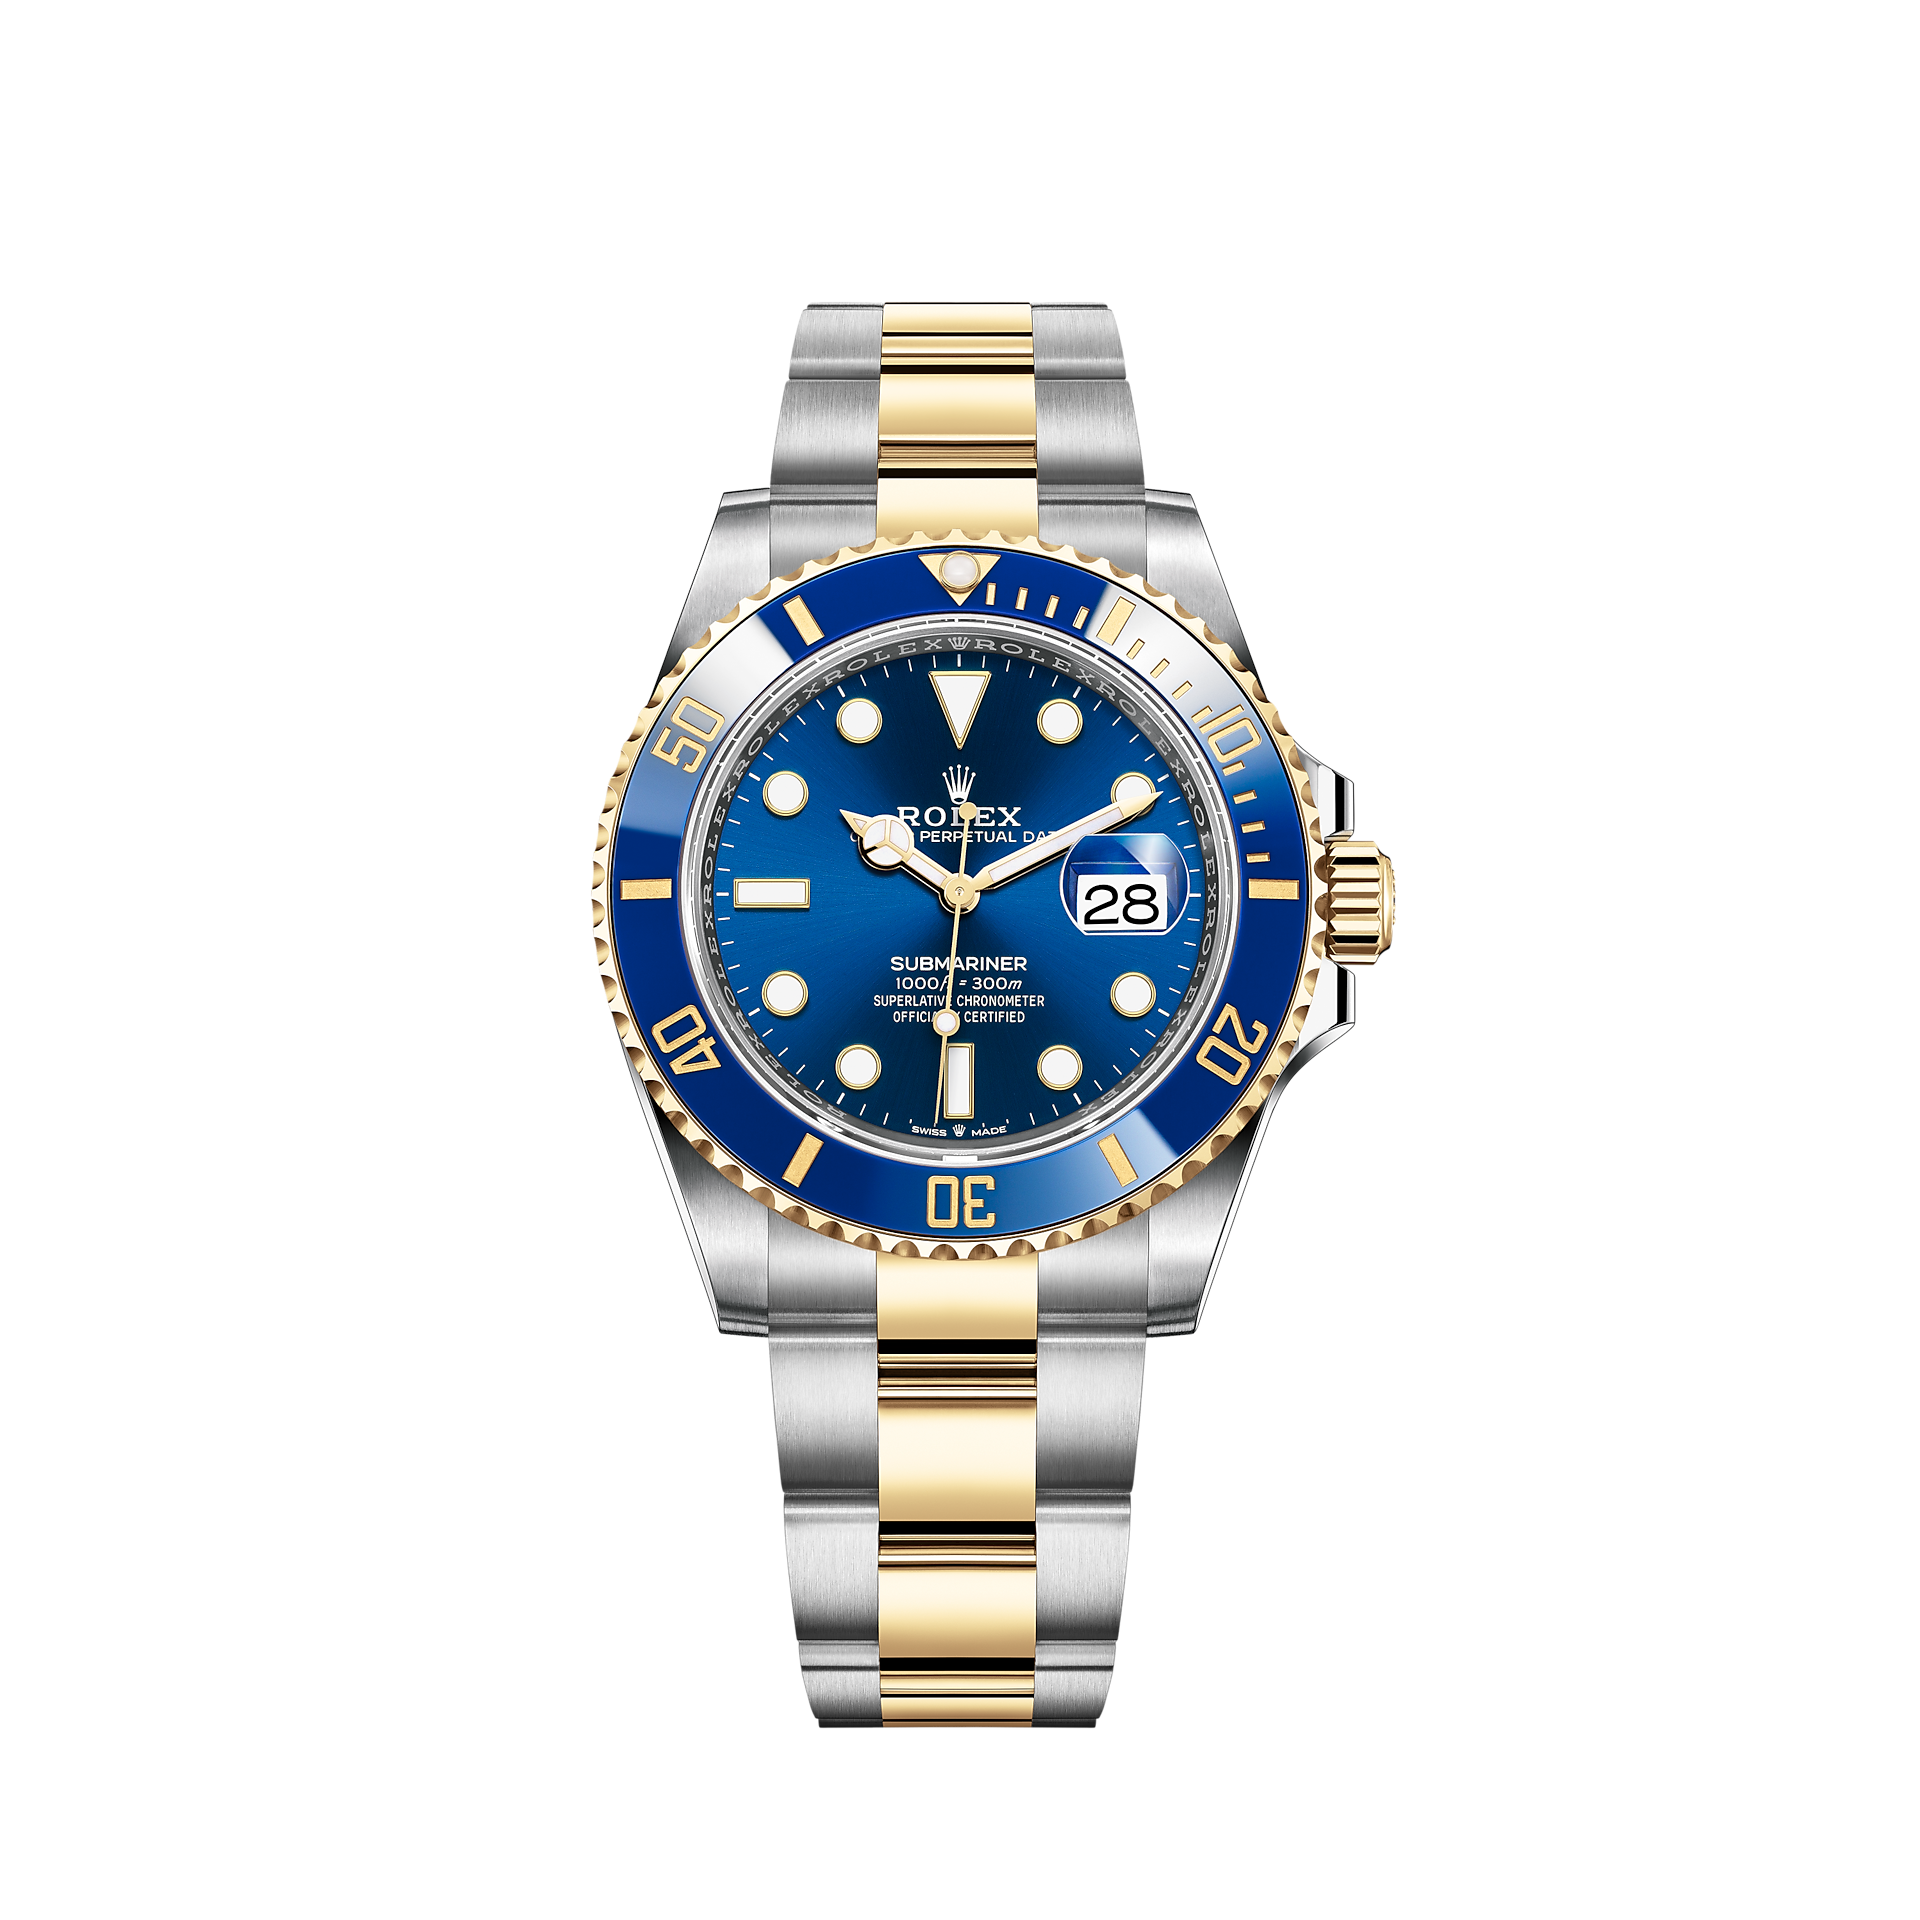 Rolex Submariner Reference Numbers | peacecommission.kdsg.gov.ng